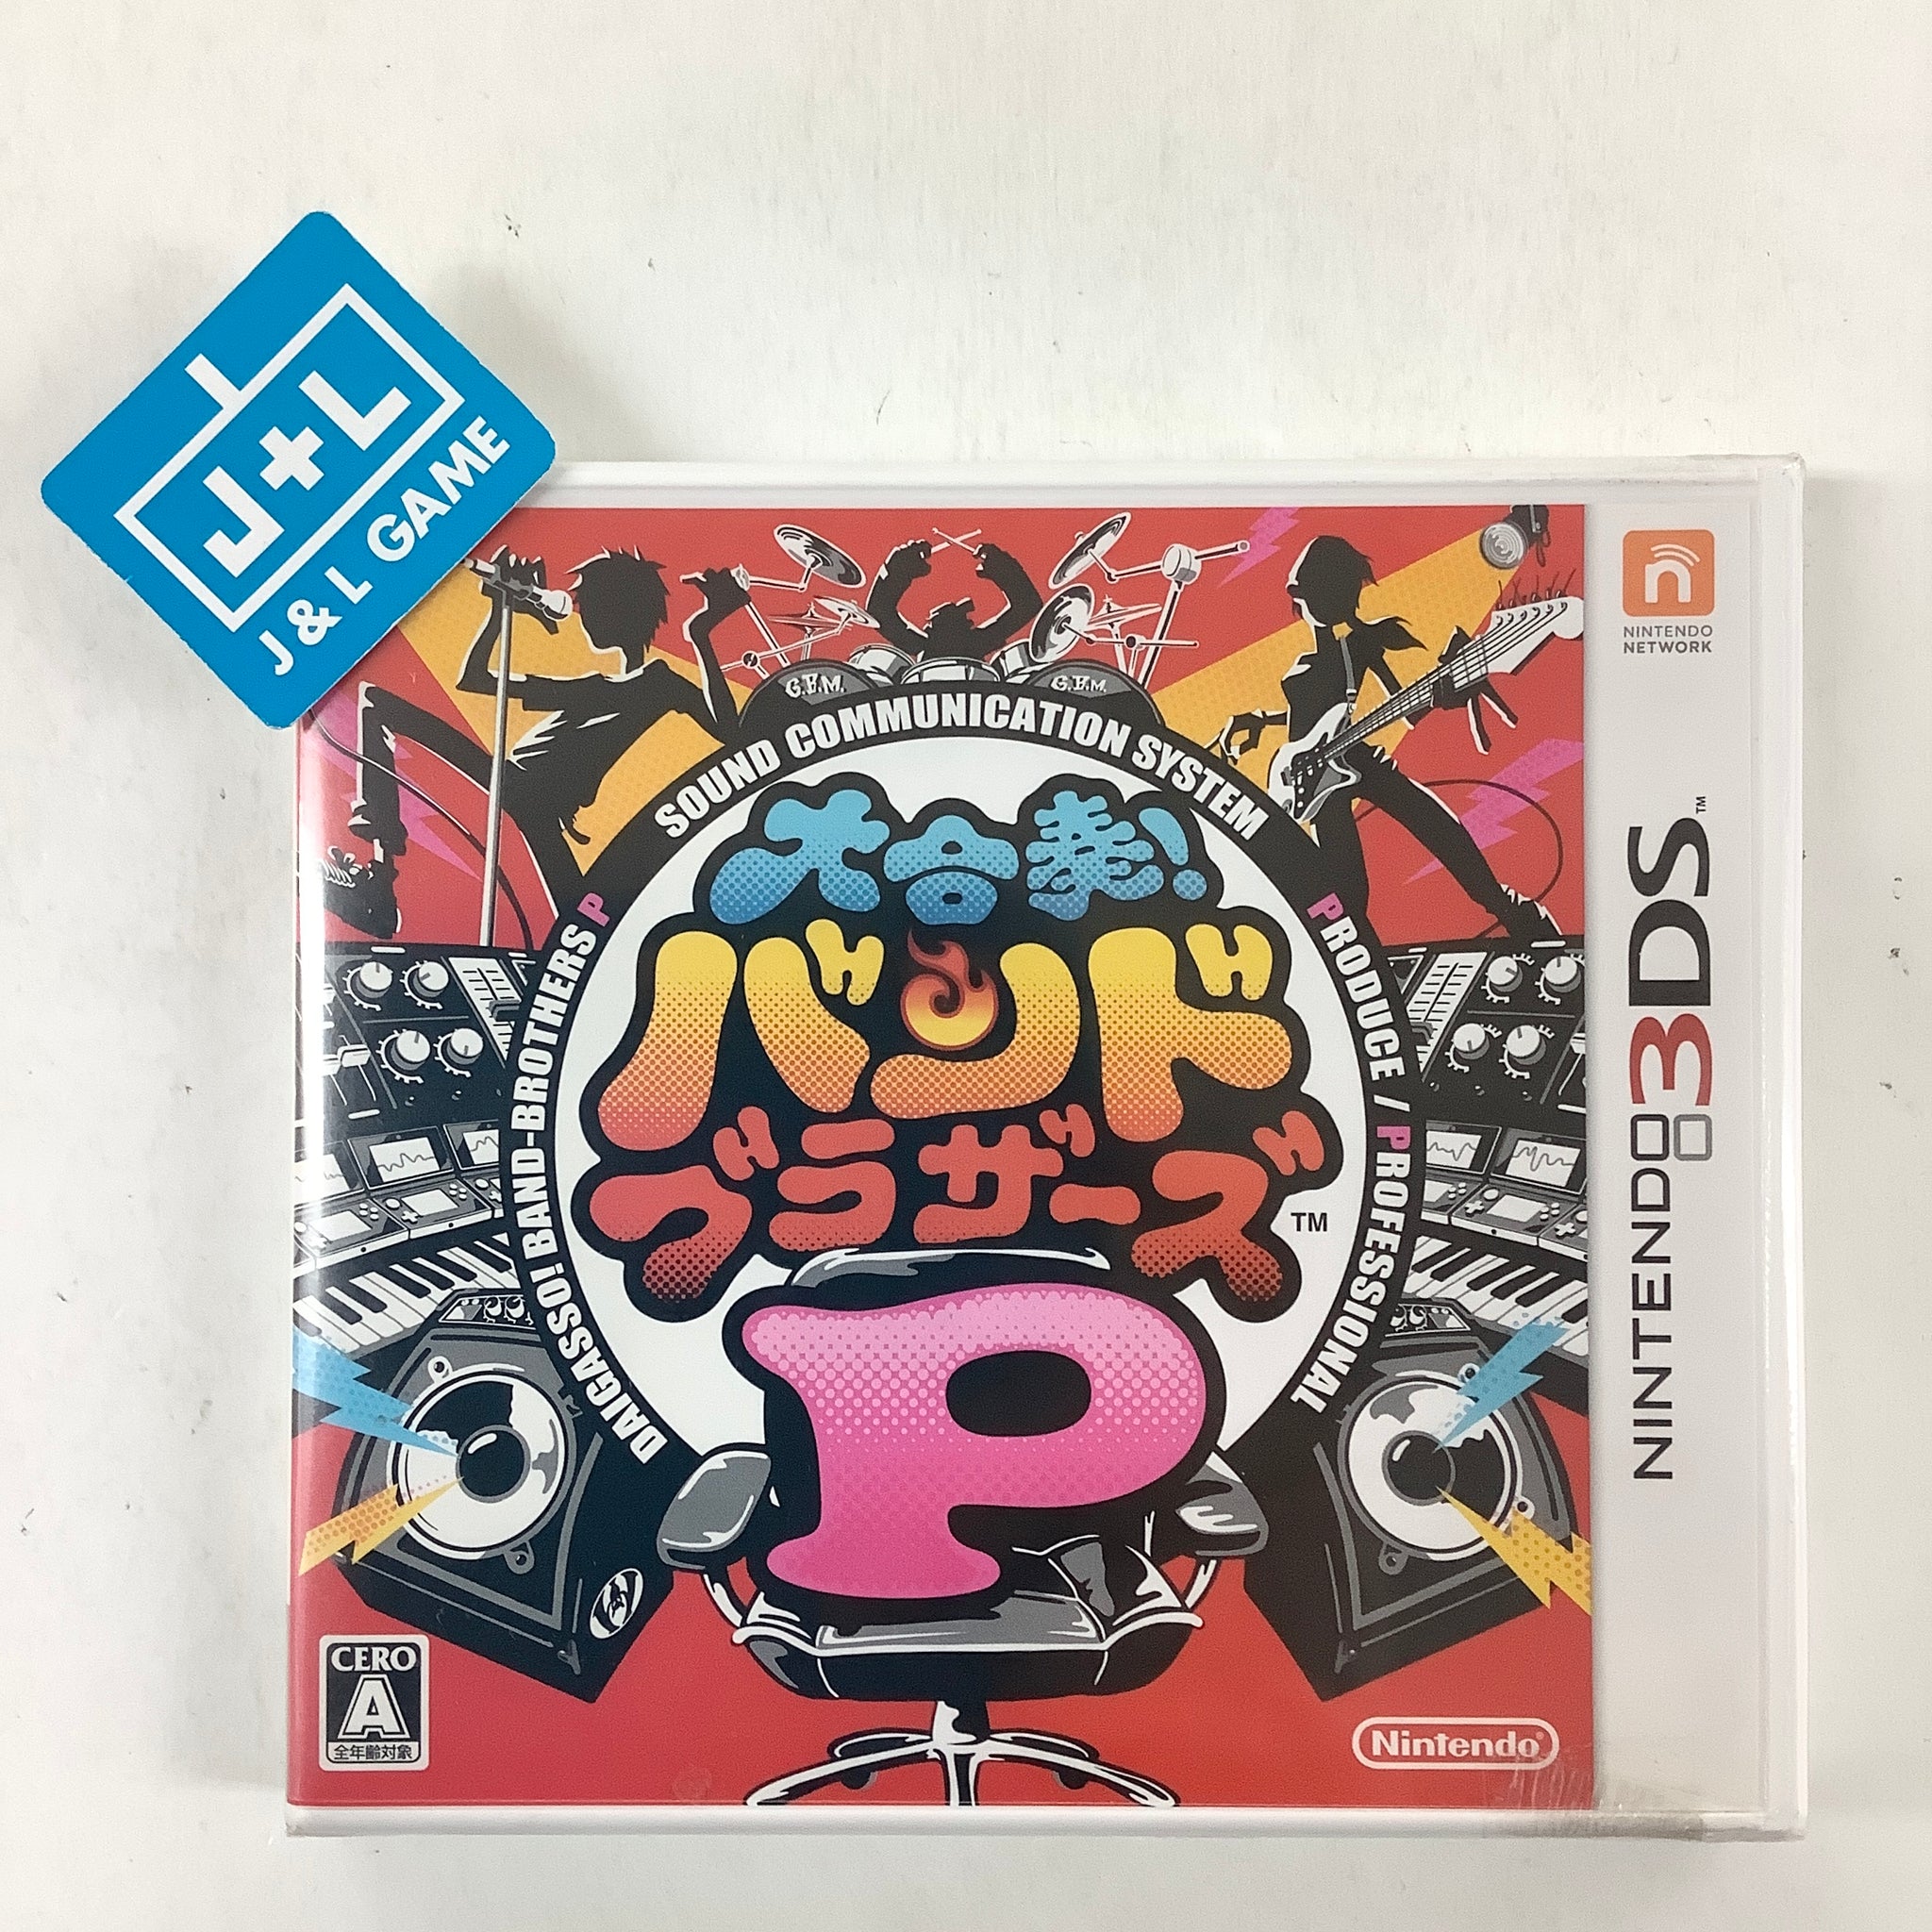 Daigassou! Band Brothers P - Nintendo 3DS (Japanese Import) – J&L Video ...